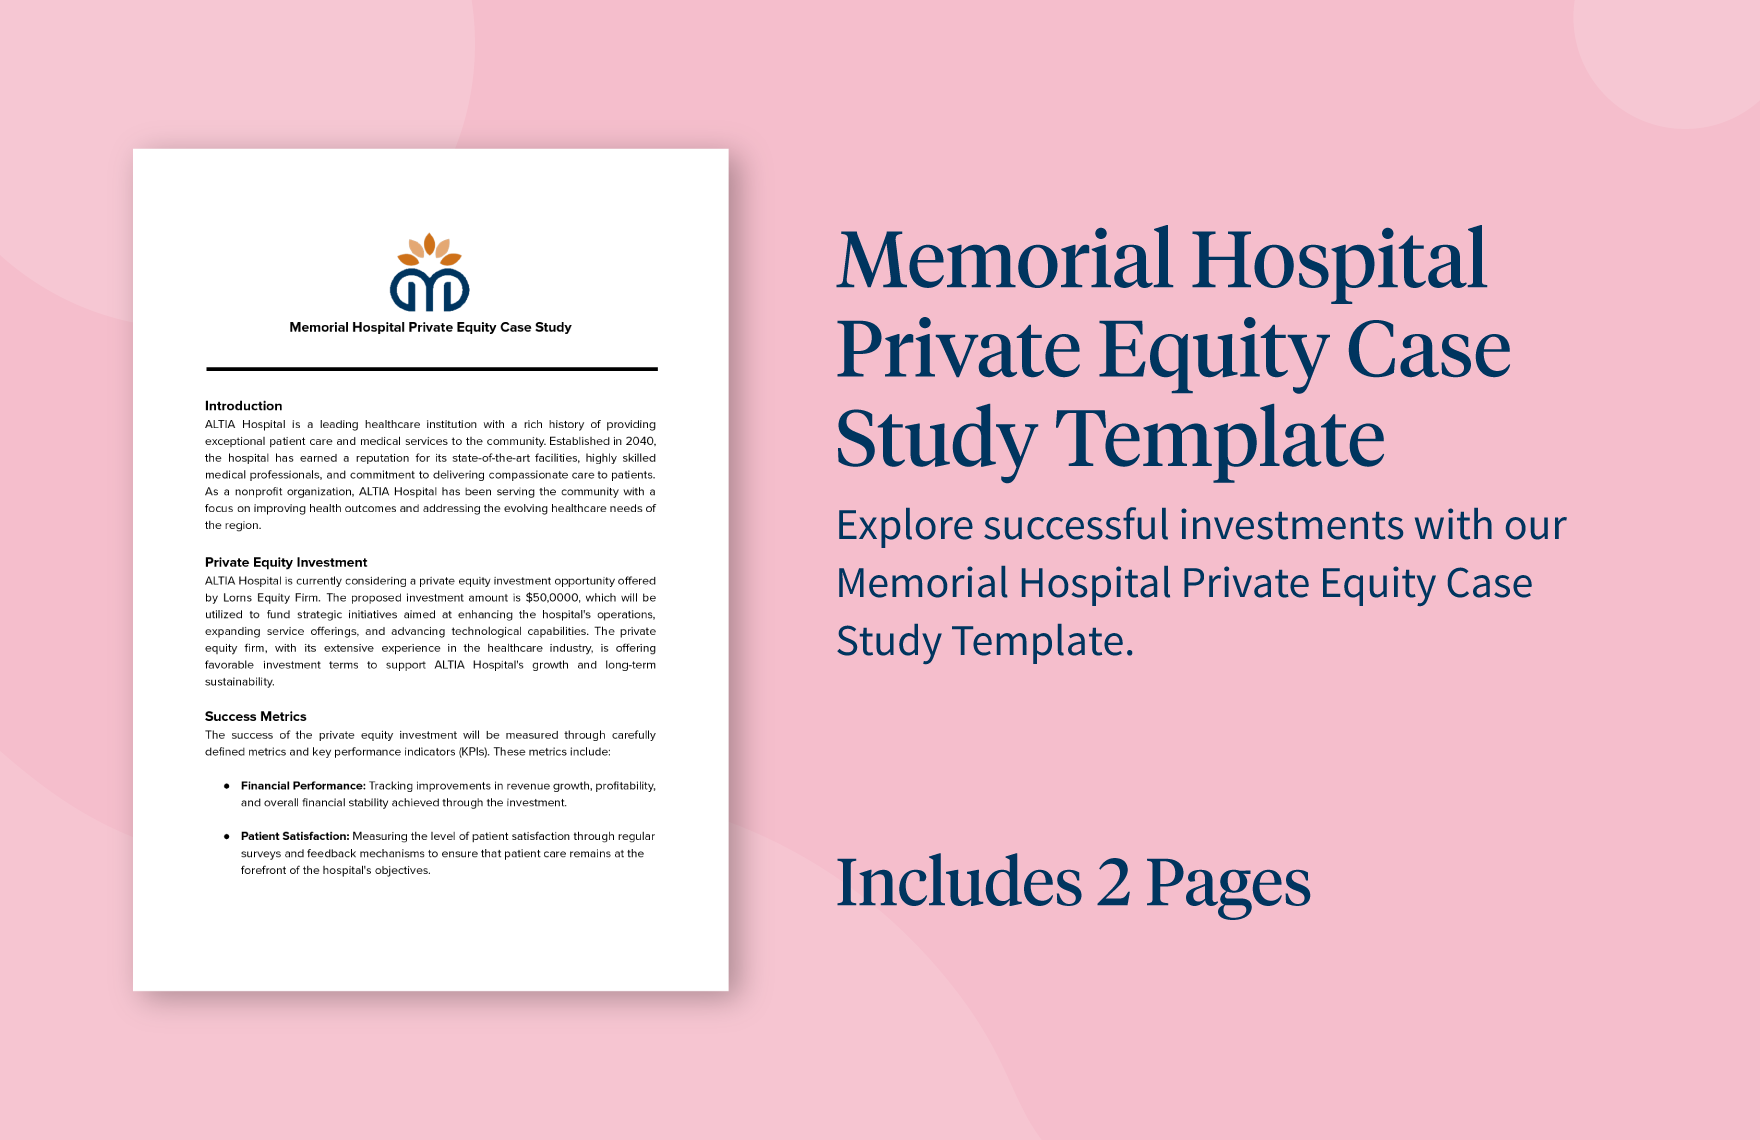 Memorial Hospital Private Equity Case Study Template in Word, Google Docs, PDF